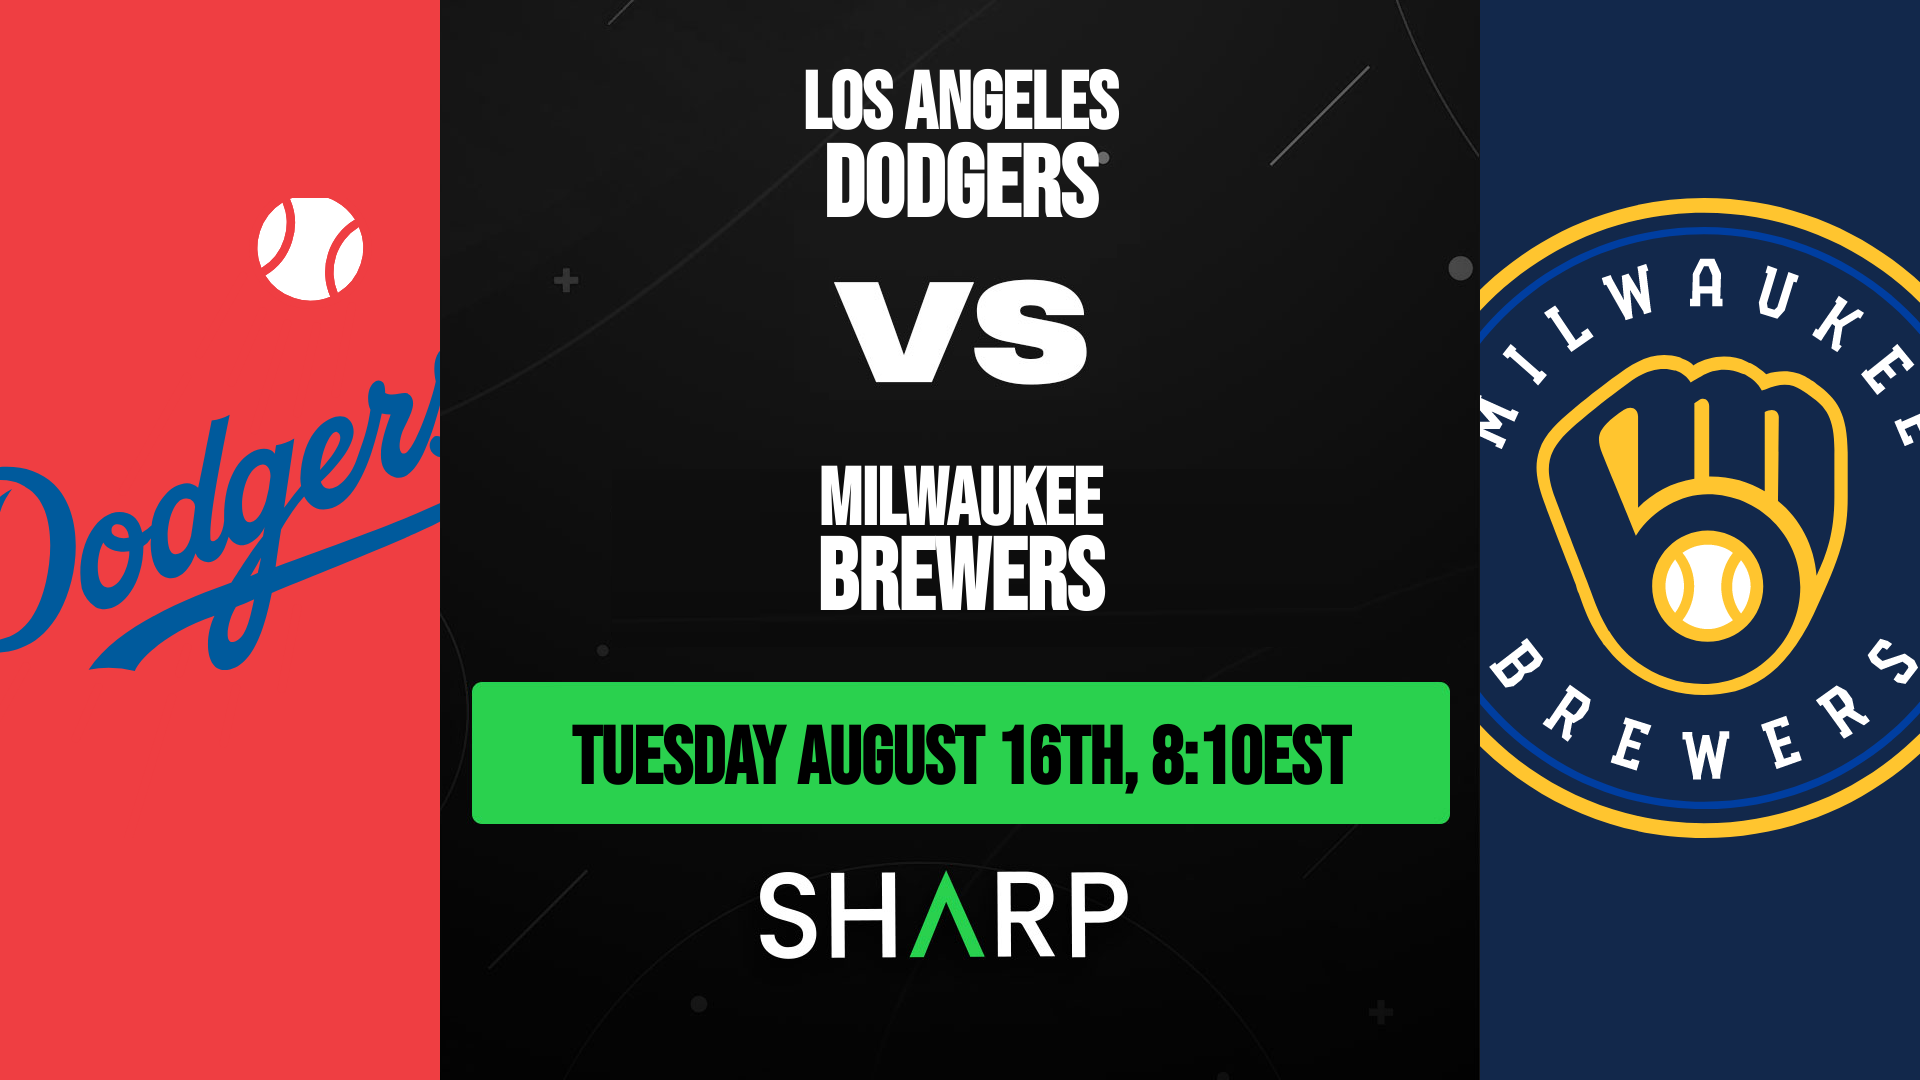 Los Angeles Dodgers @ Milwaukee Brewers Matchup Preview - August 16th, 2022